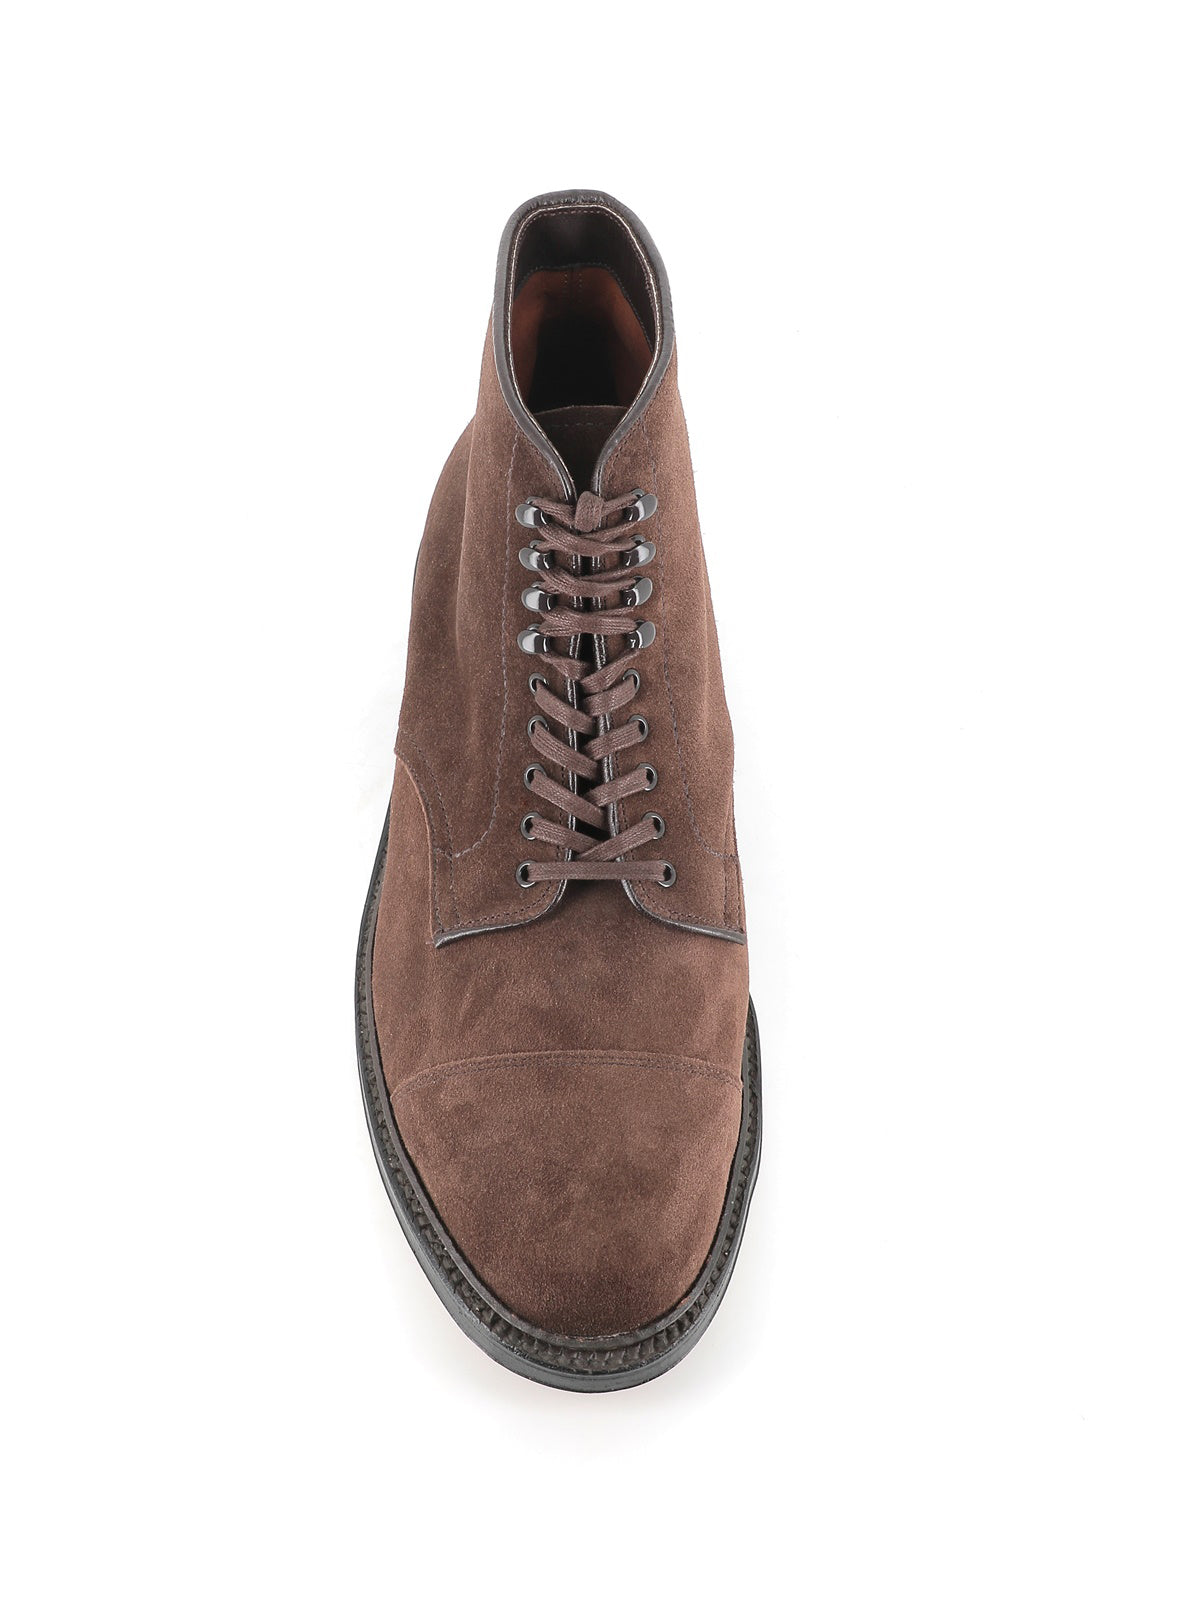  Lace-up Boot 4081 Hy Alden Uomo Marrone - 4